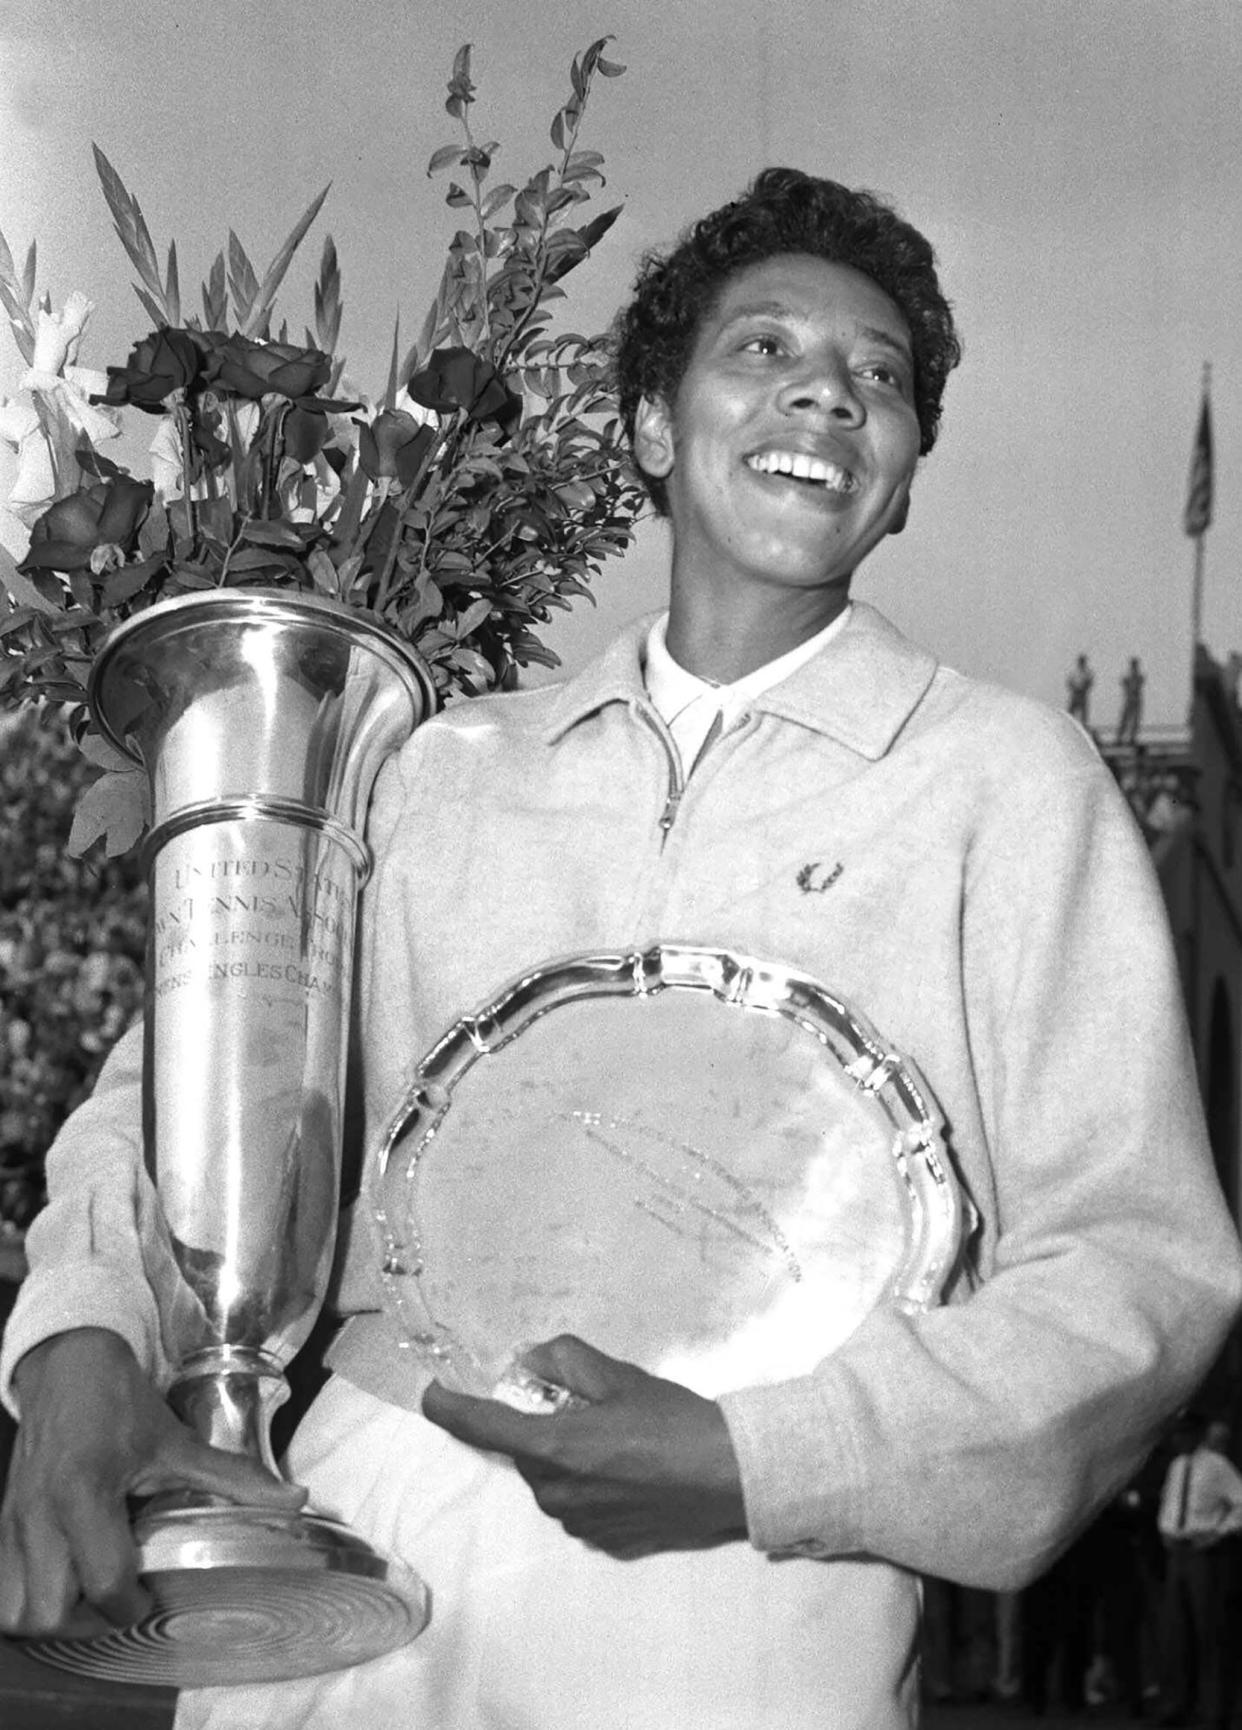 Althea Gibson, who won the National women's singles tennis championship in 1957 and 1958, became New Jersey State Commissioner of Athletics in 1975. She held that post for 10 years. Gibson was inducted into the New Jersey Hall of Fame in 2009.